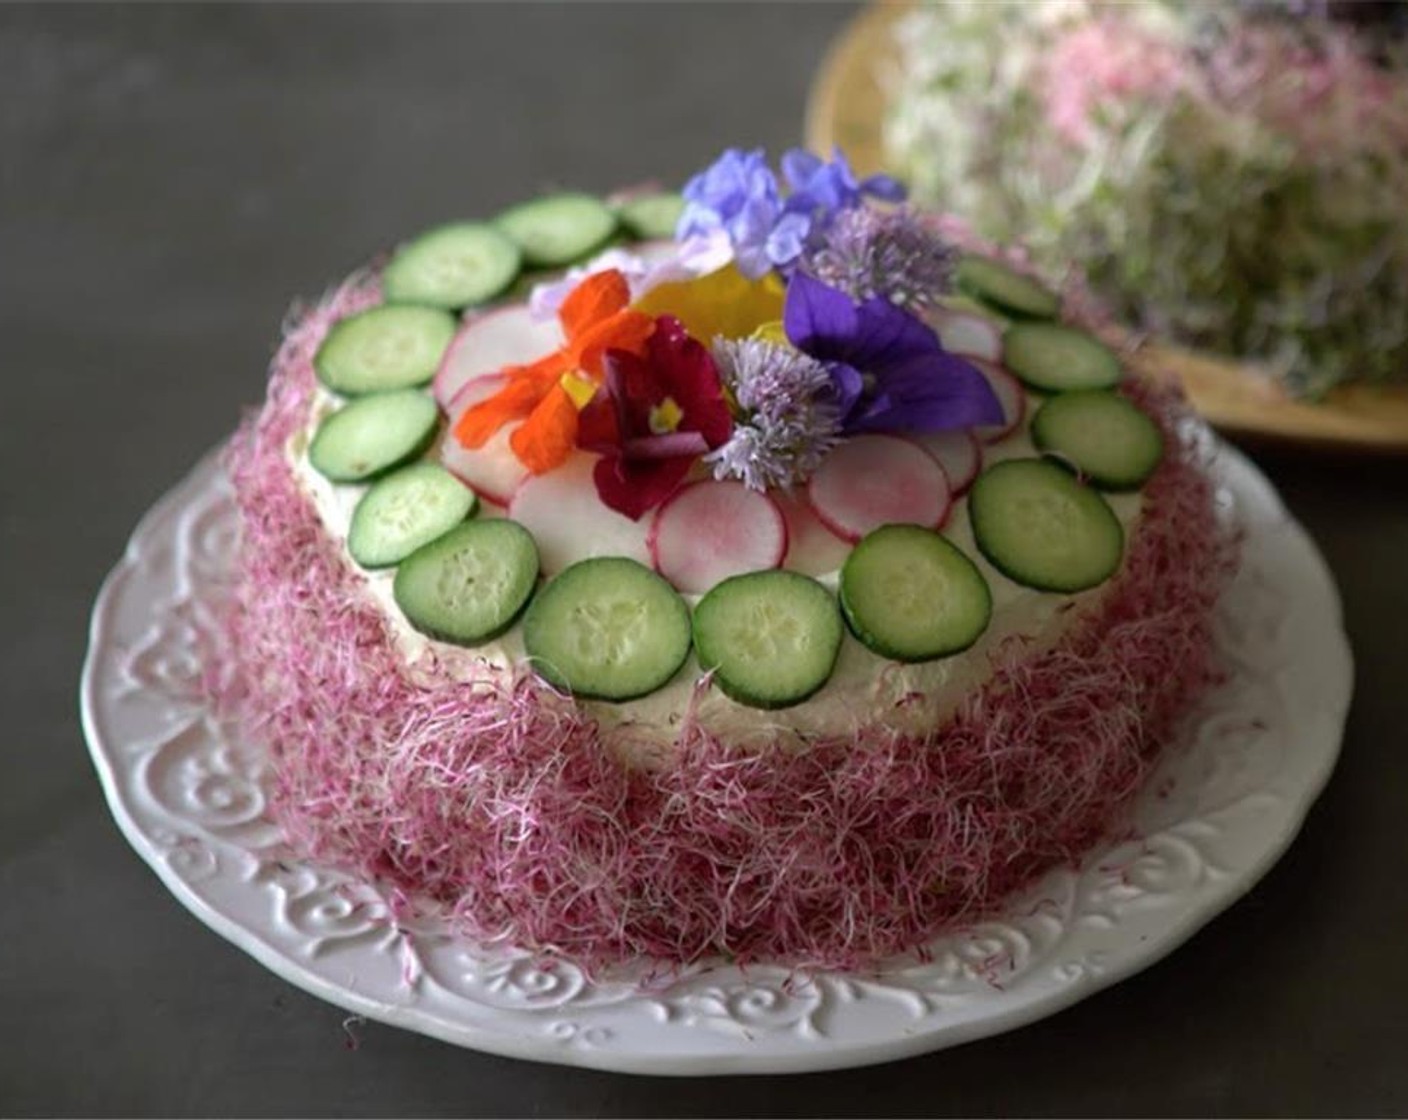 step 10 Add the last layer of the bread onto the cake and press down firmly. Coat the outside of the cake with enough Cream Cheese (to taste) to cover the entire cake. Garnish with Cucumbers (to taste), Edible Flowers (to taste) and Multi-Colored Sprouts (to taste). Serve the Egg Salad Cake and enjoy!